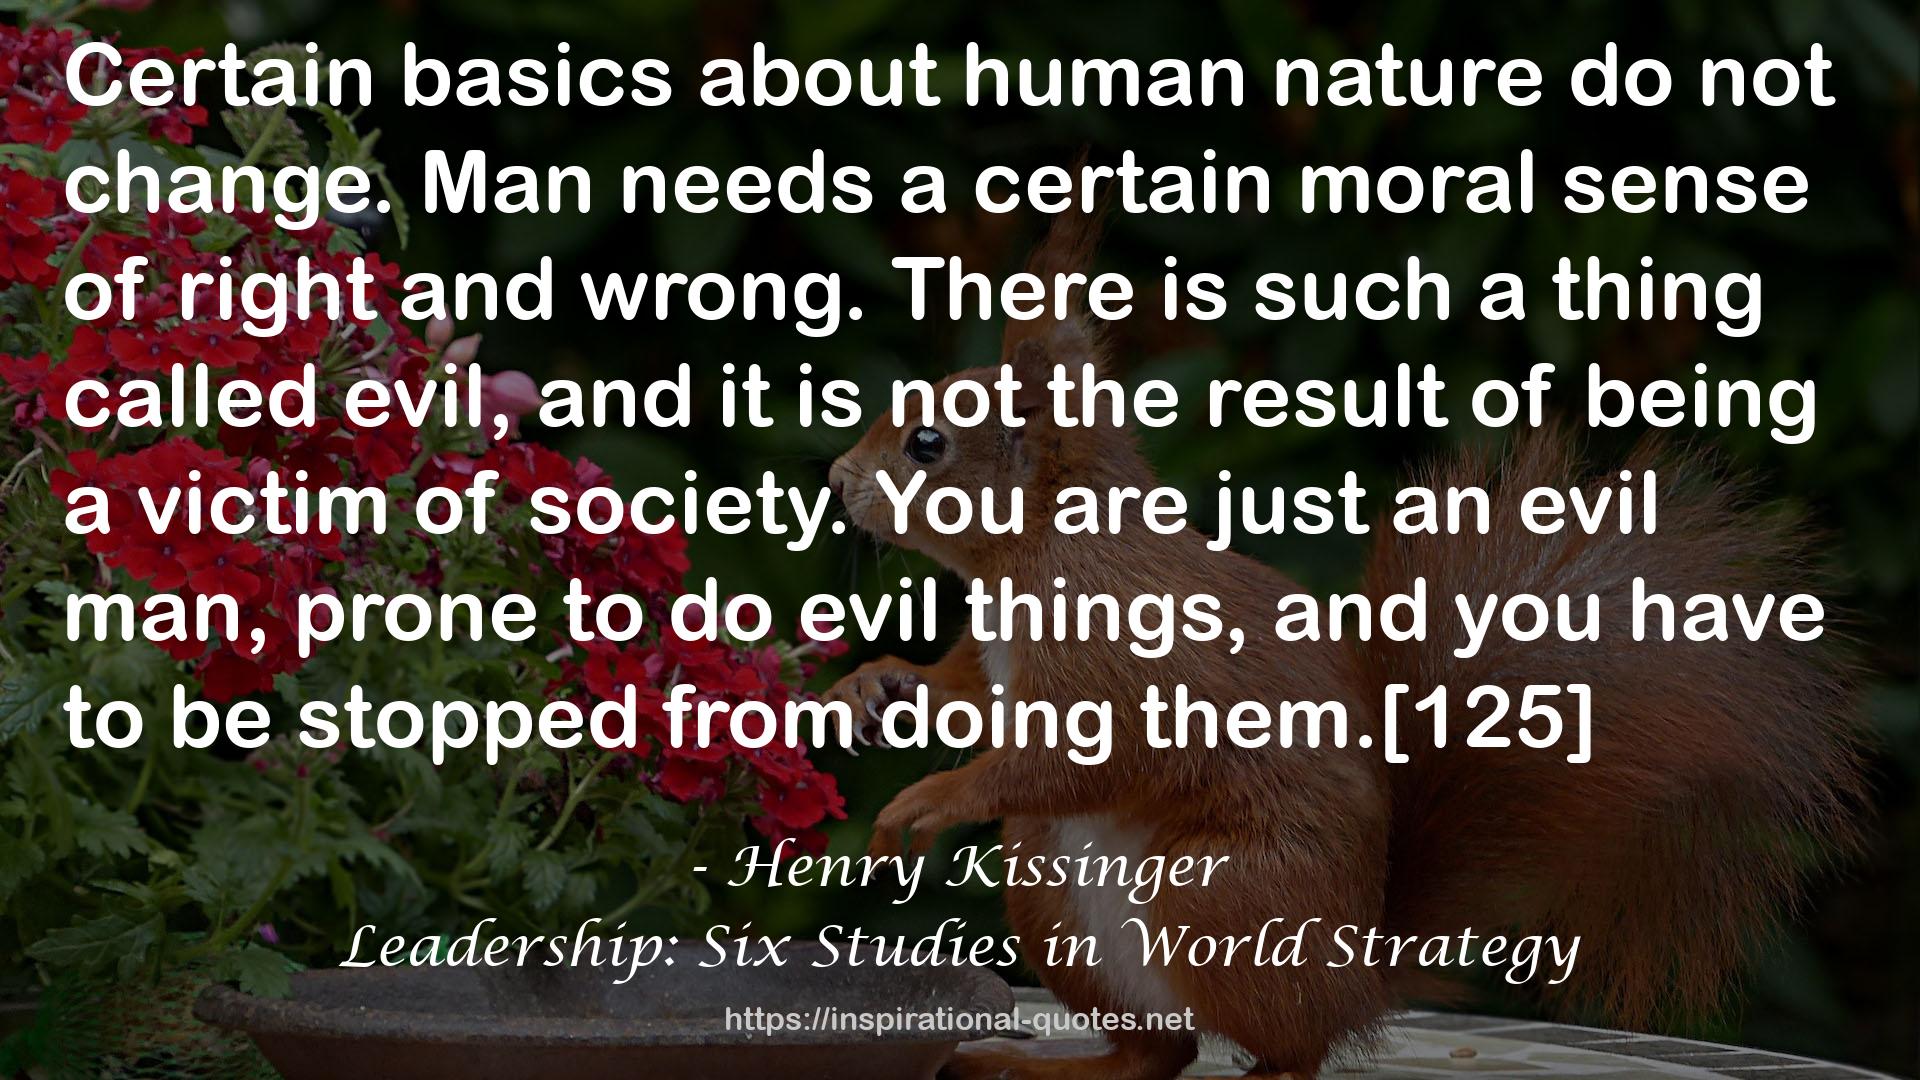 Leadership: Six Studies in World Strategy QUOTES